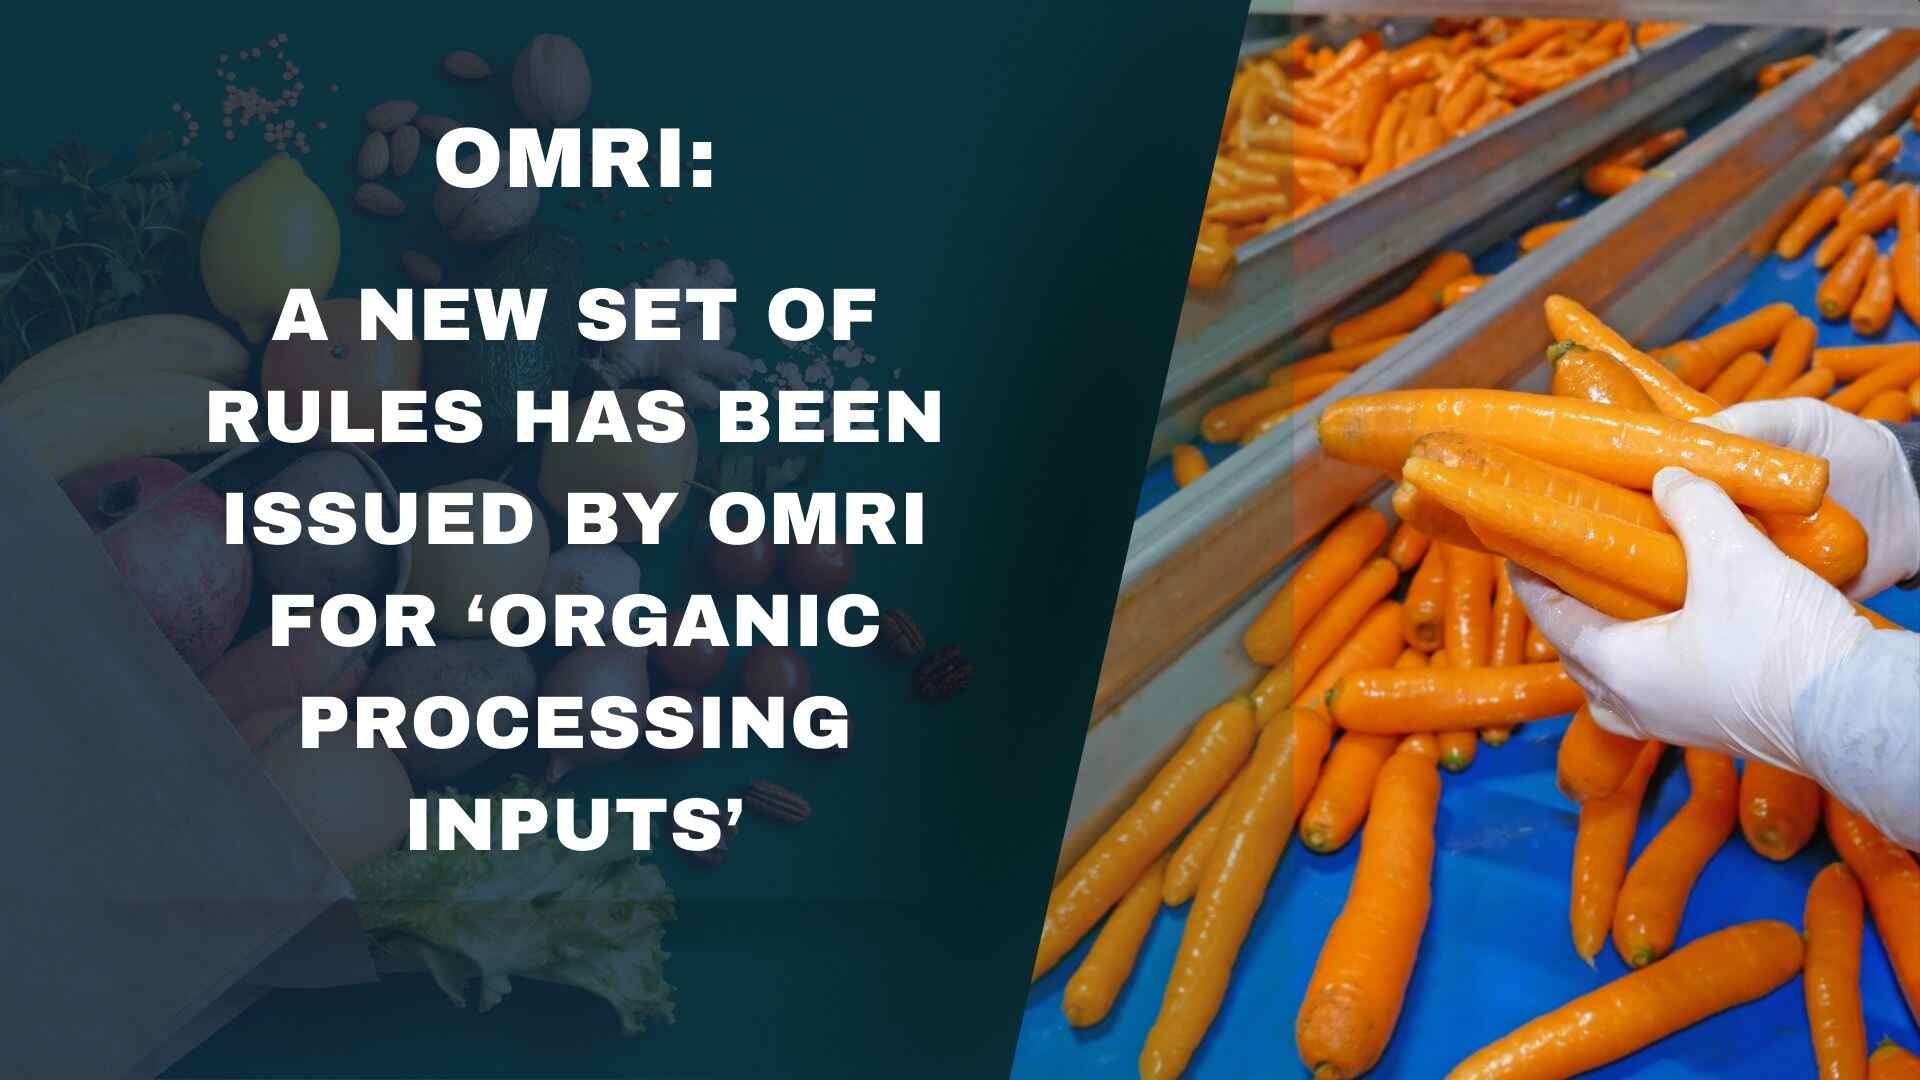 A new set of rules has been issued by OMRI for organic processing inputs